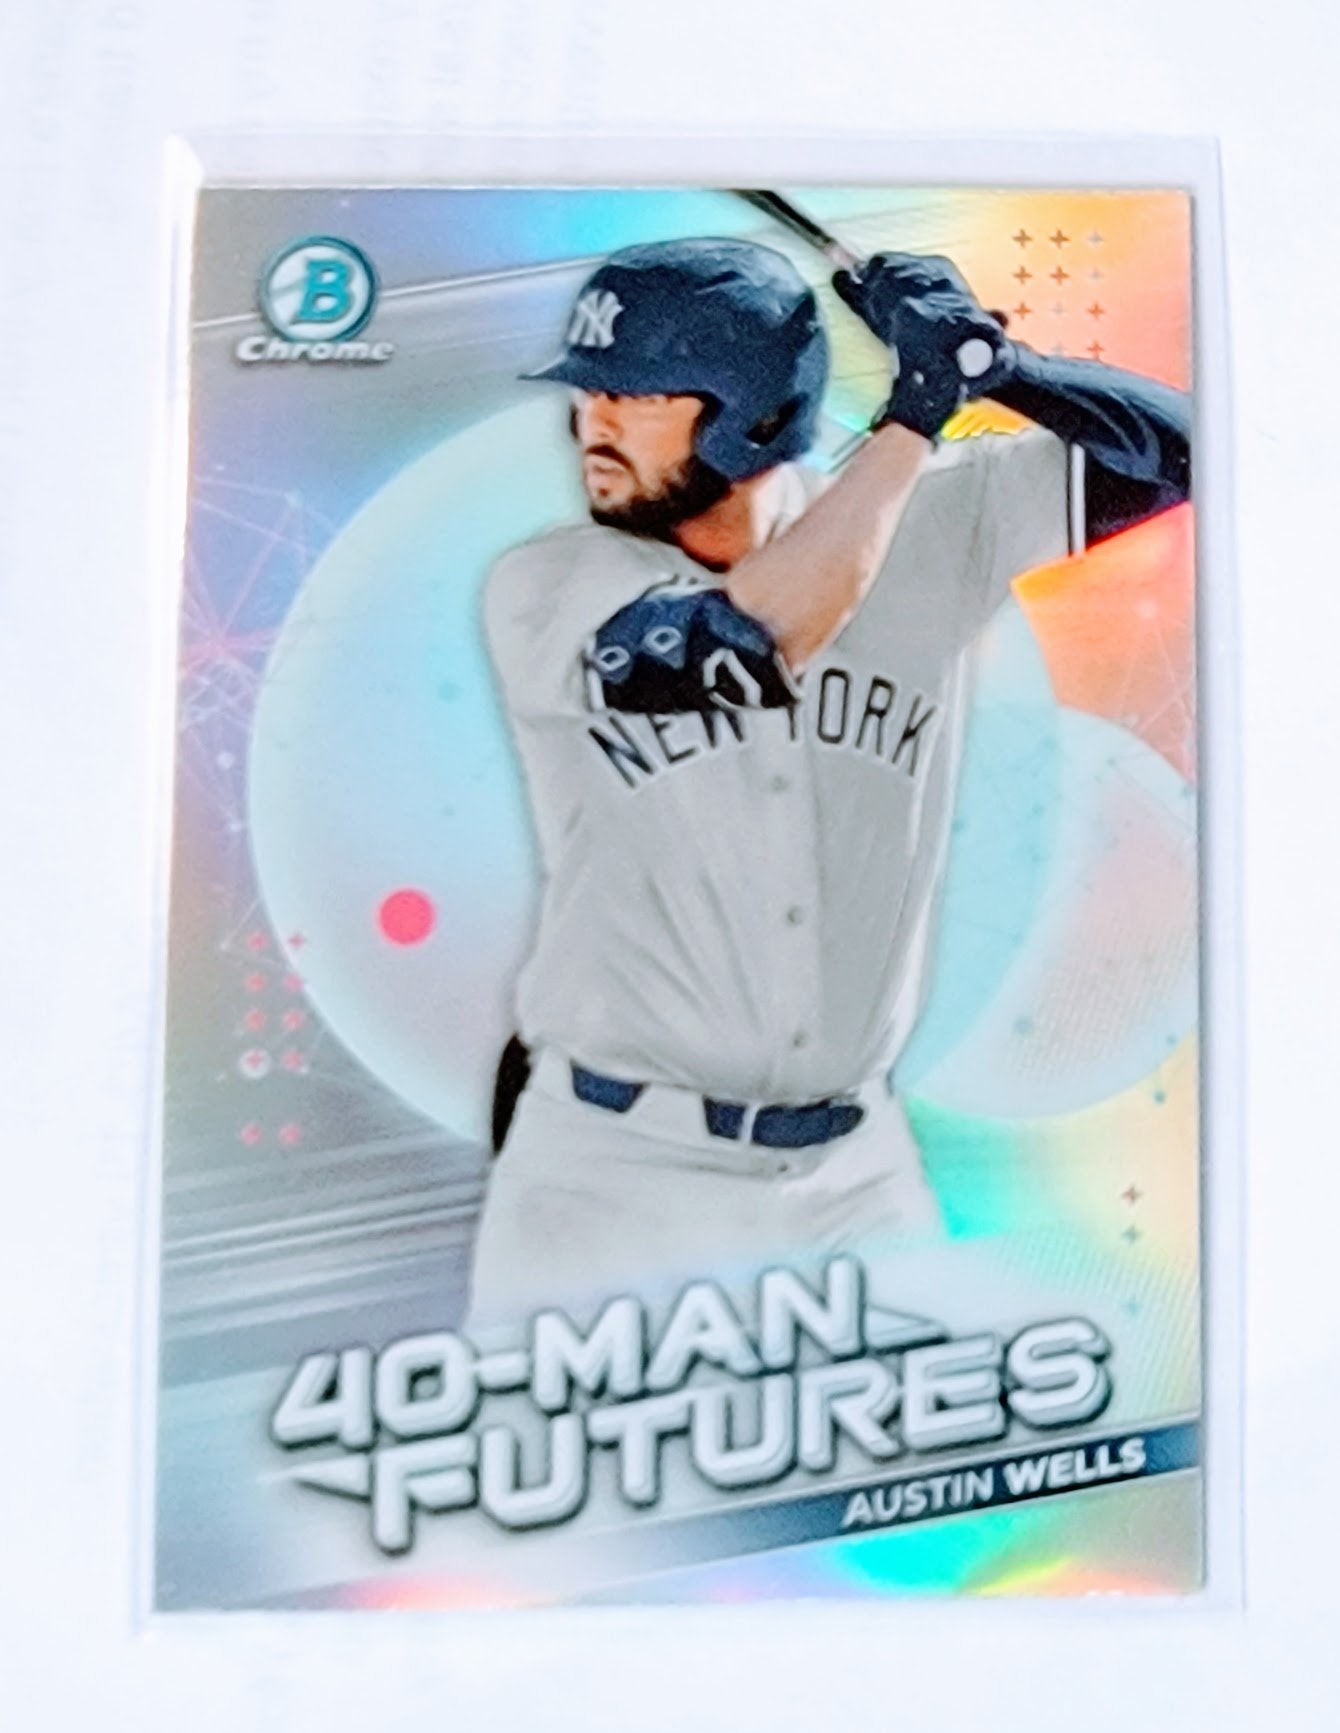 2021 Bowman Chrome Austin Wells 40 Man Futures Refractor Baseball Trading Card SMCB1 simple Xclusive Collectibles   